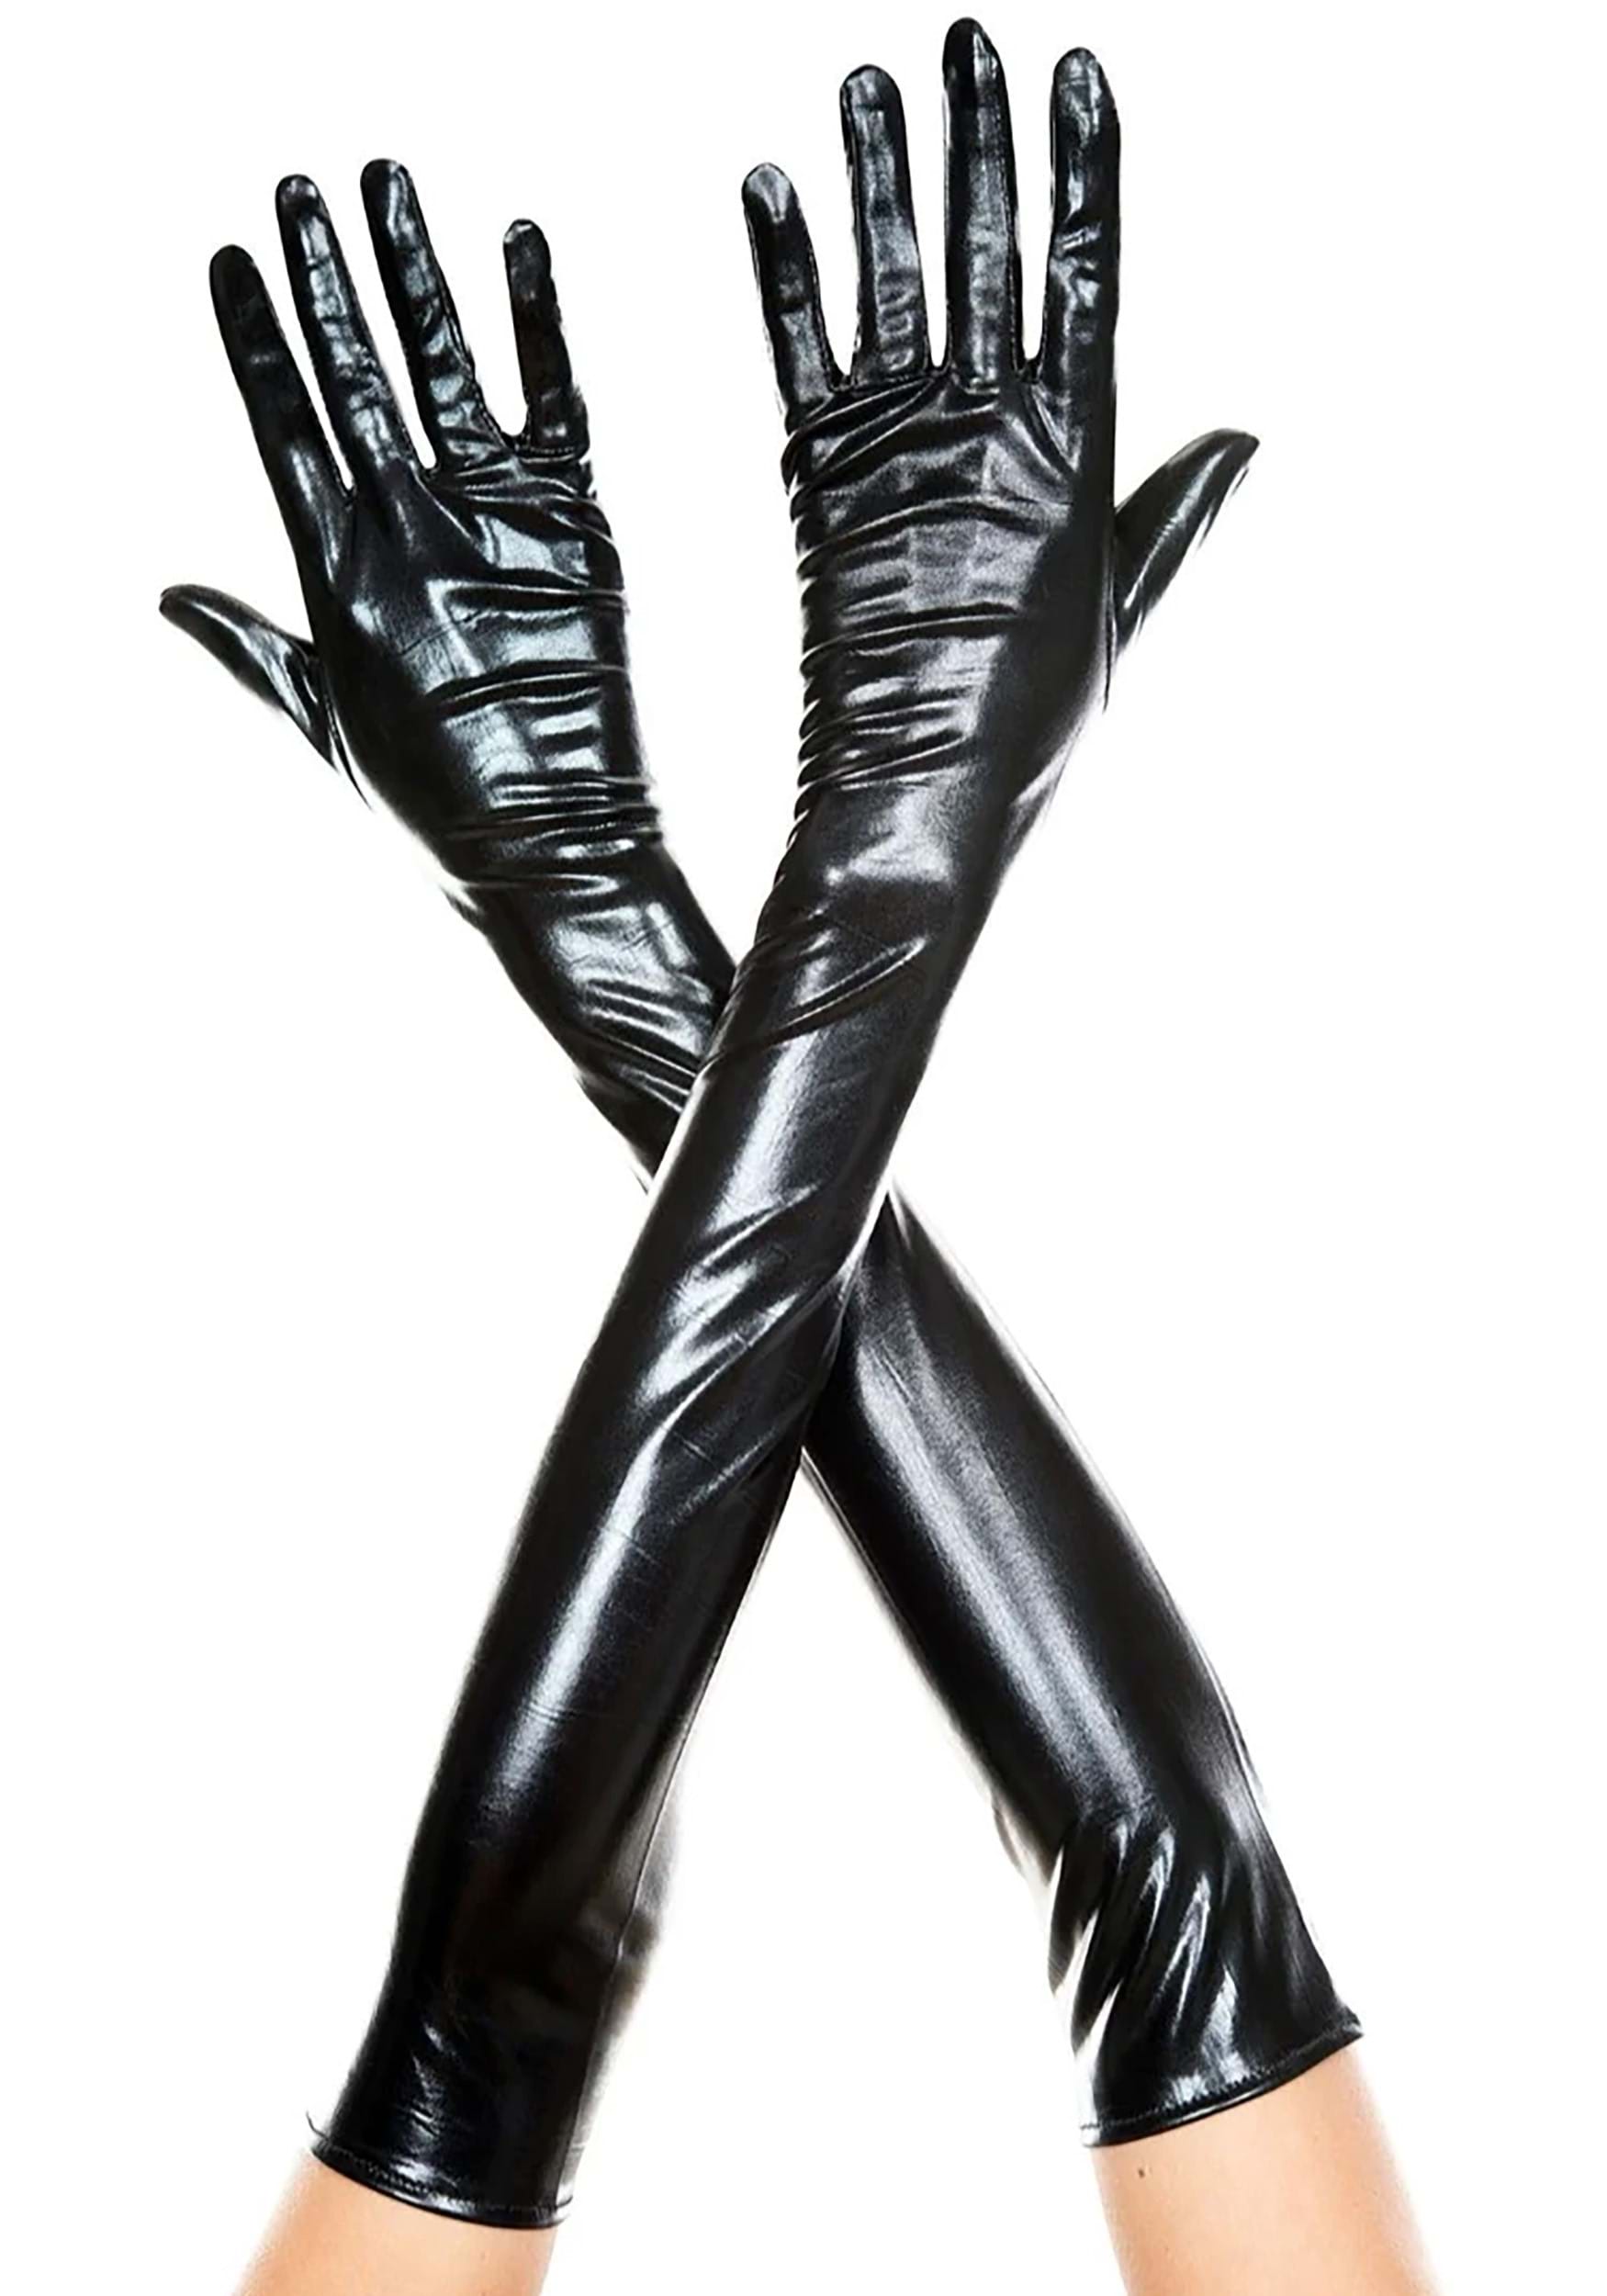 https://images.halloweencostumes.ca/products/93447/1-1/womens-extra-long-black-faux-leather-gloves.jpg